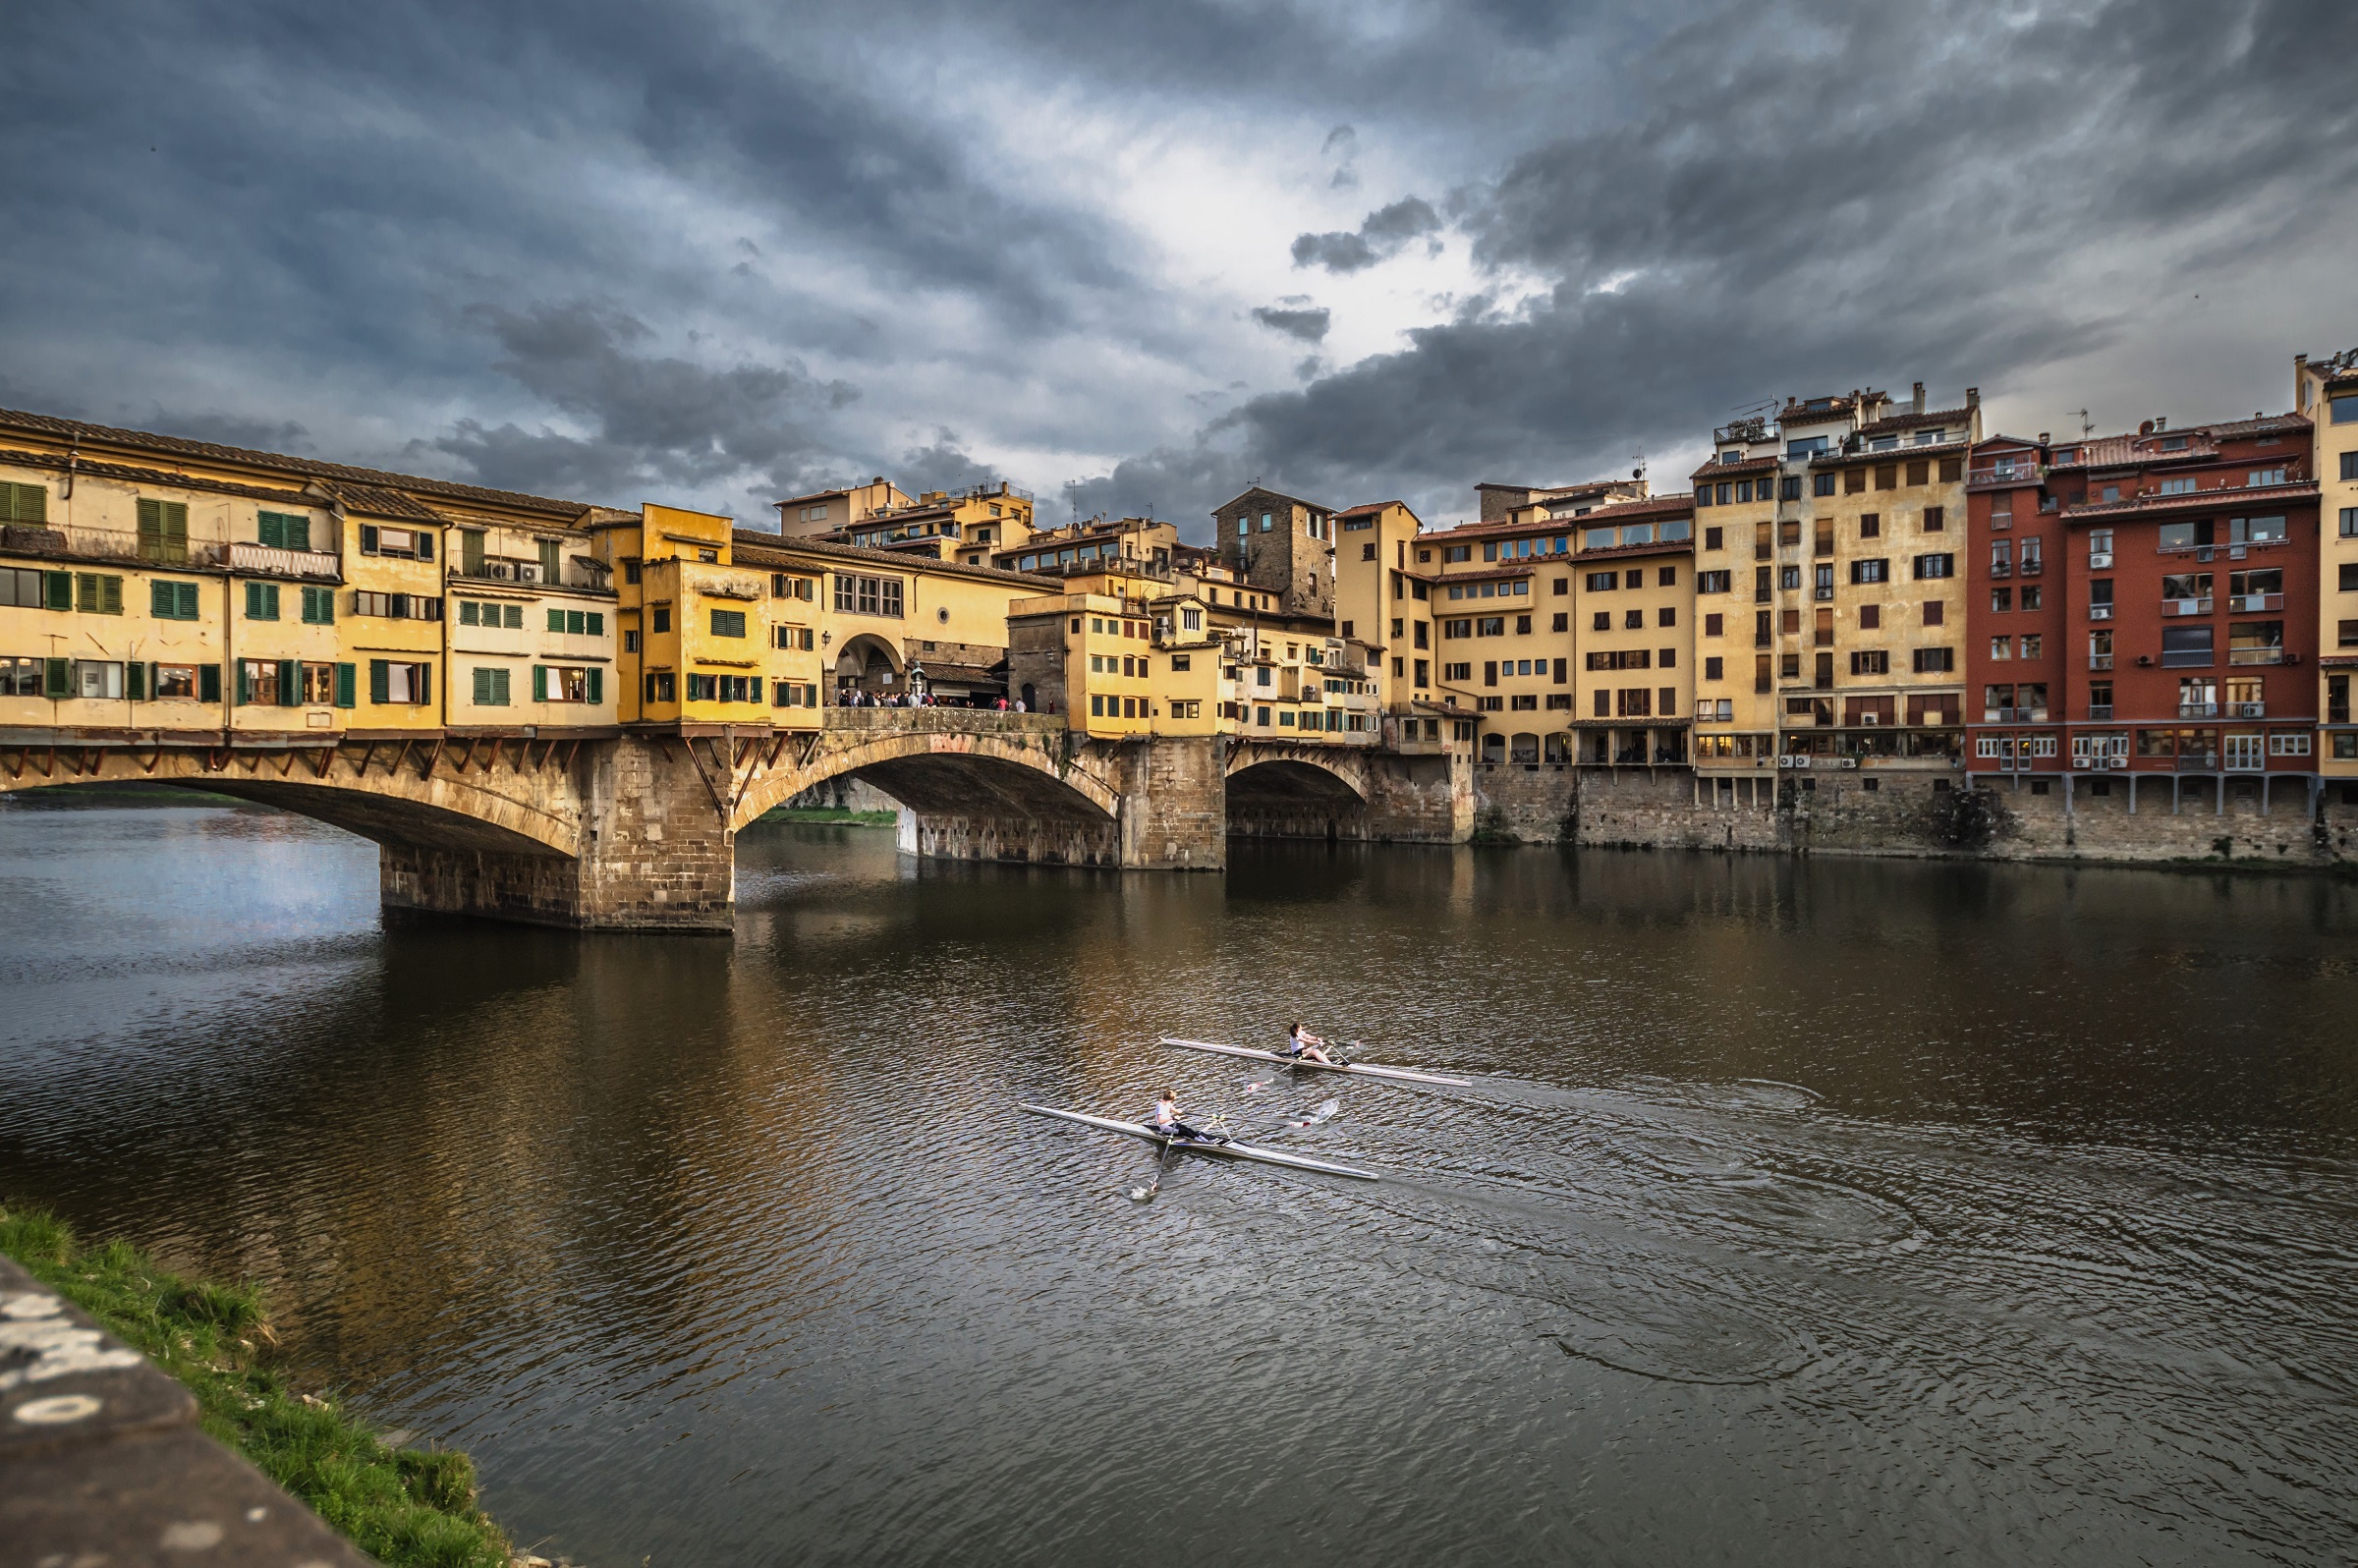 Rowing on the Arno...